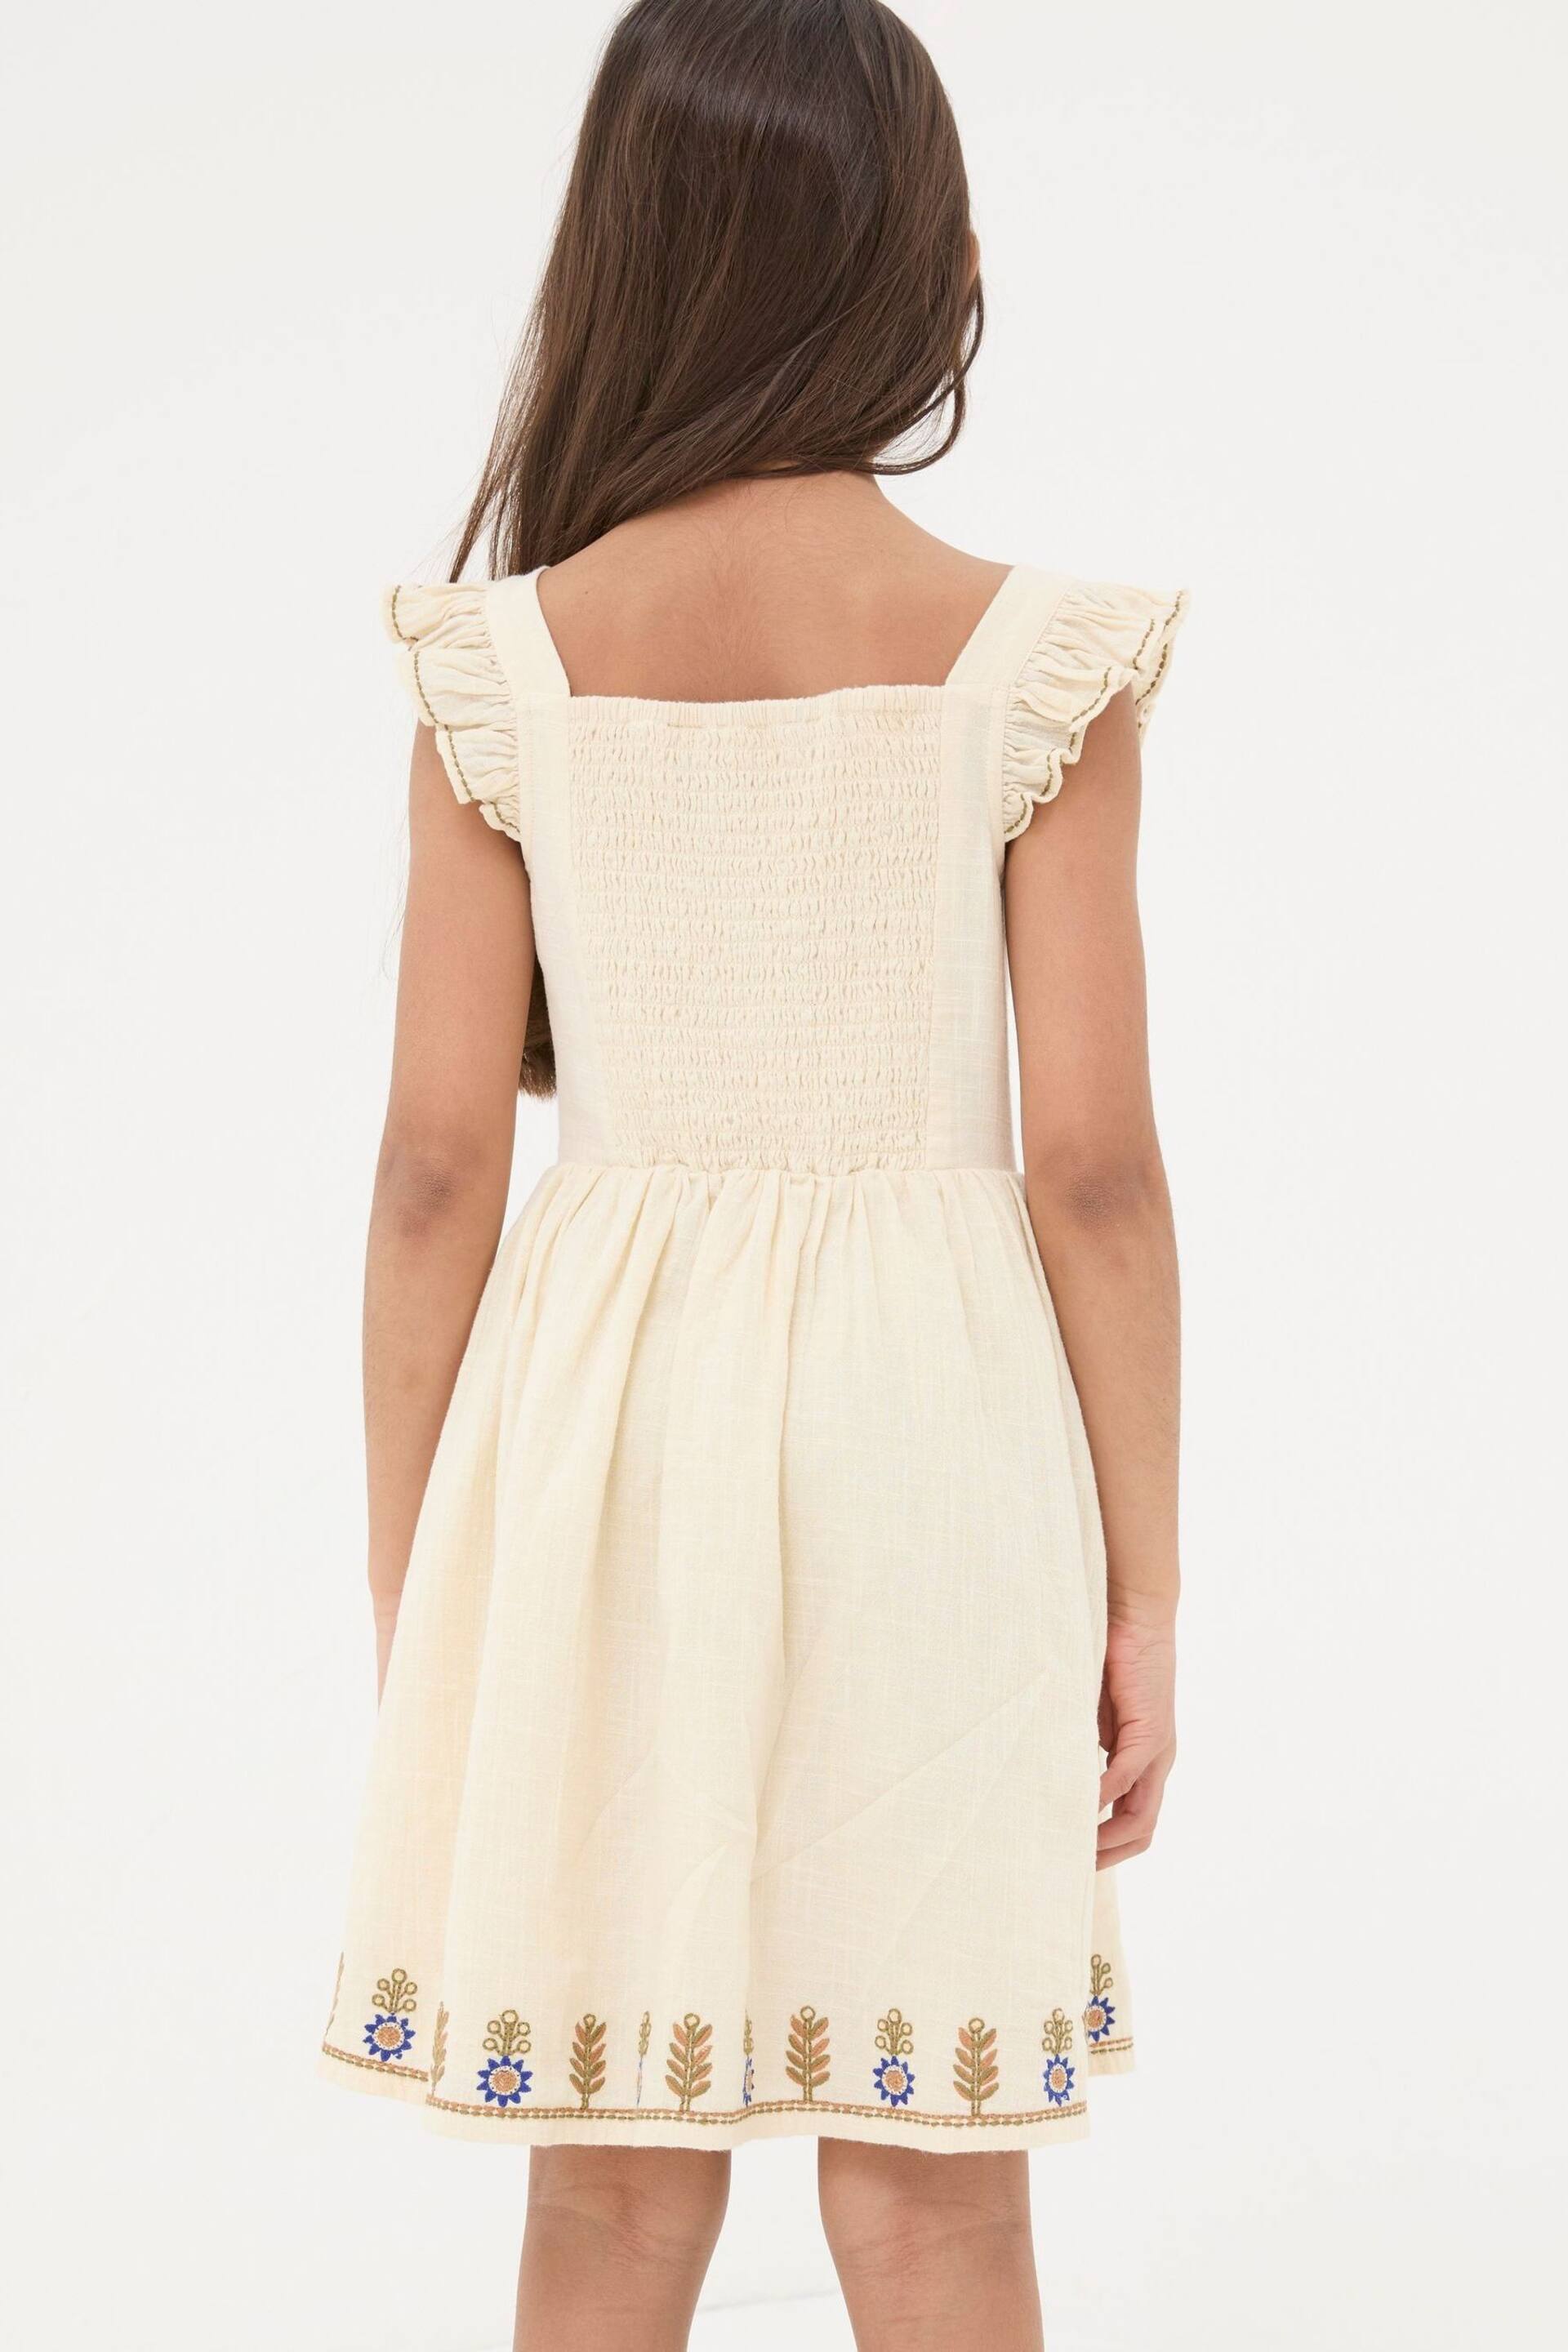 FatFace Natural Embroidered Strappy Dress - Image 2 of 5